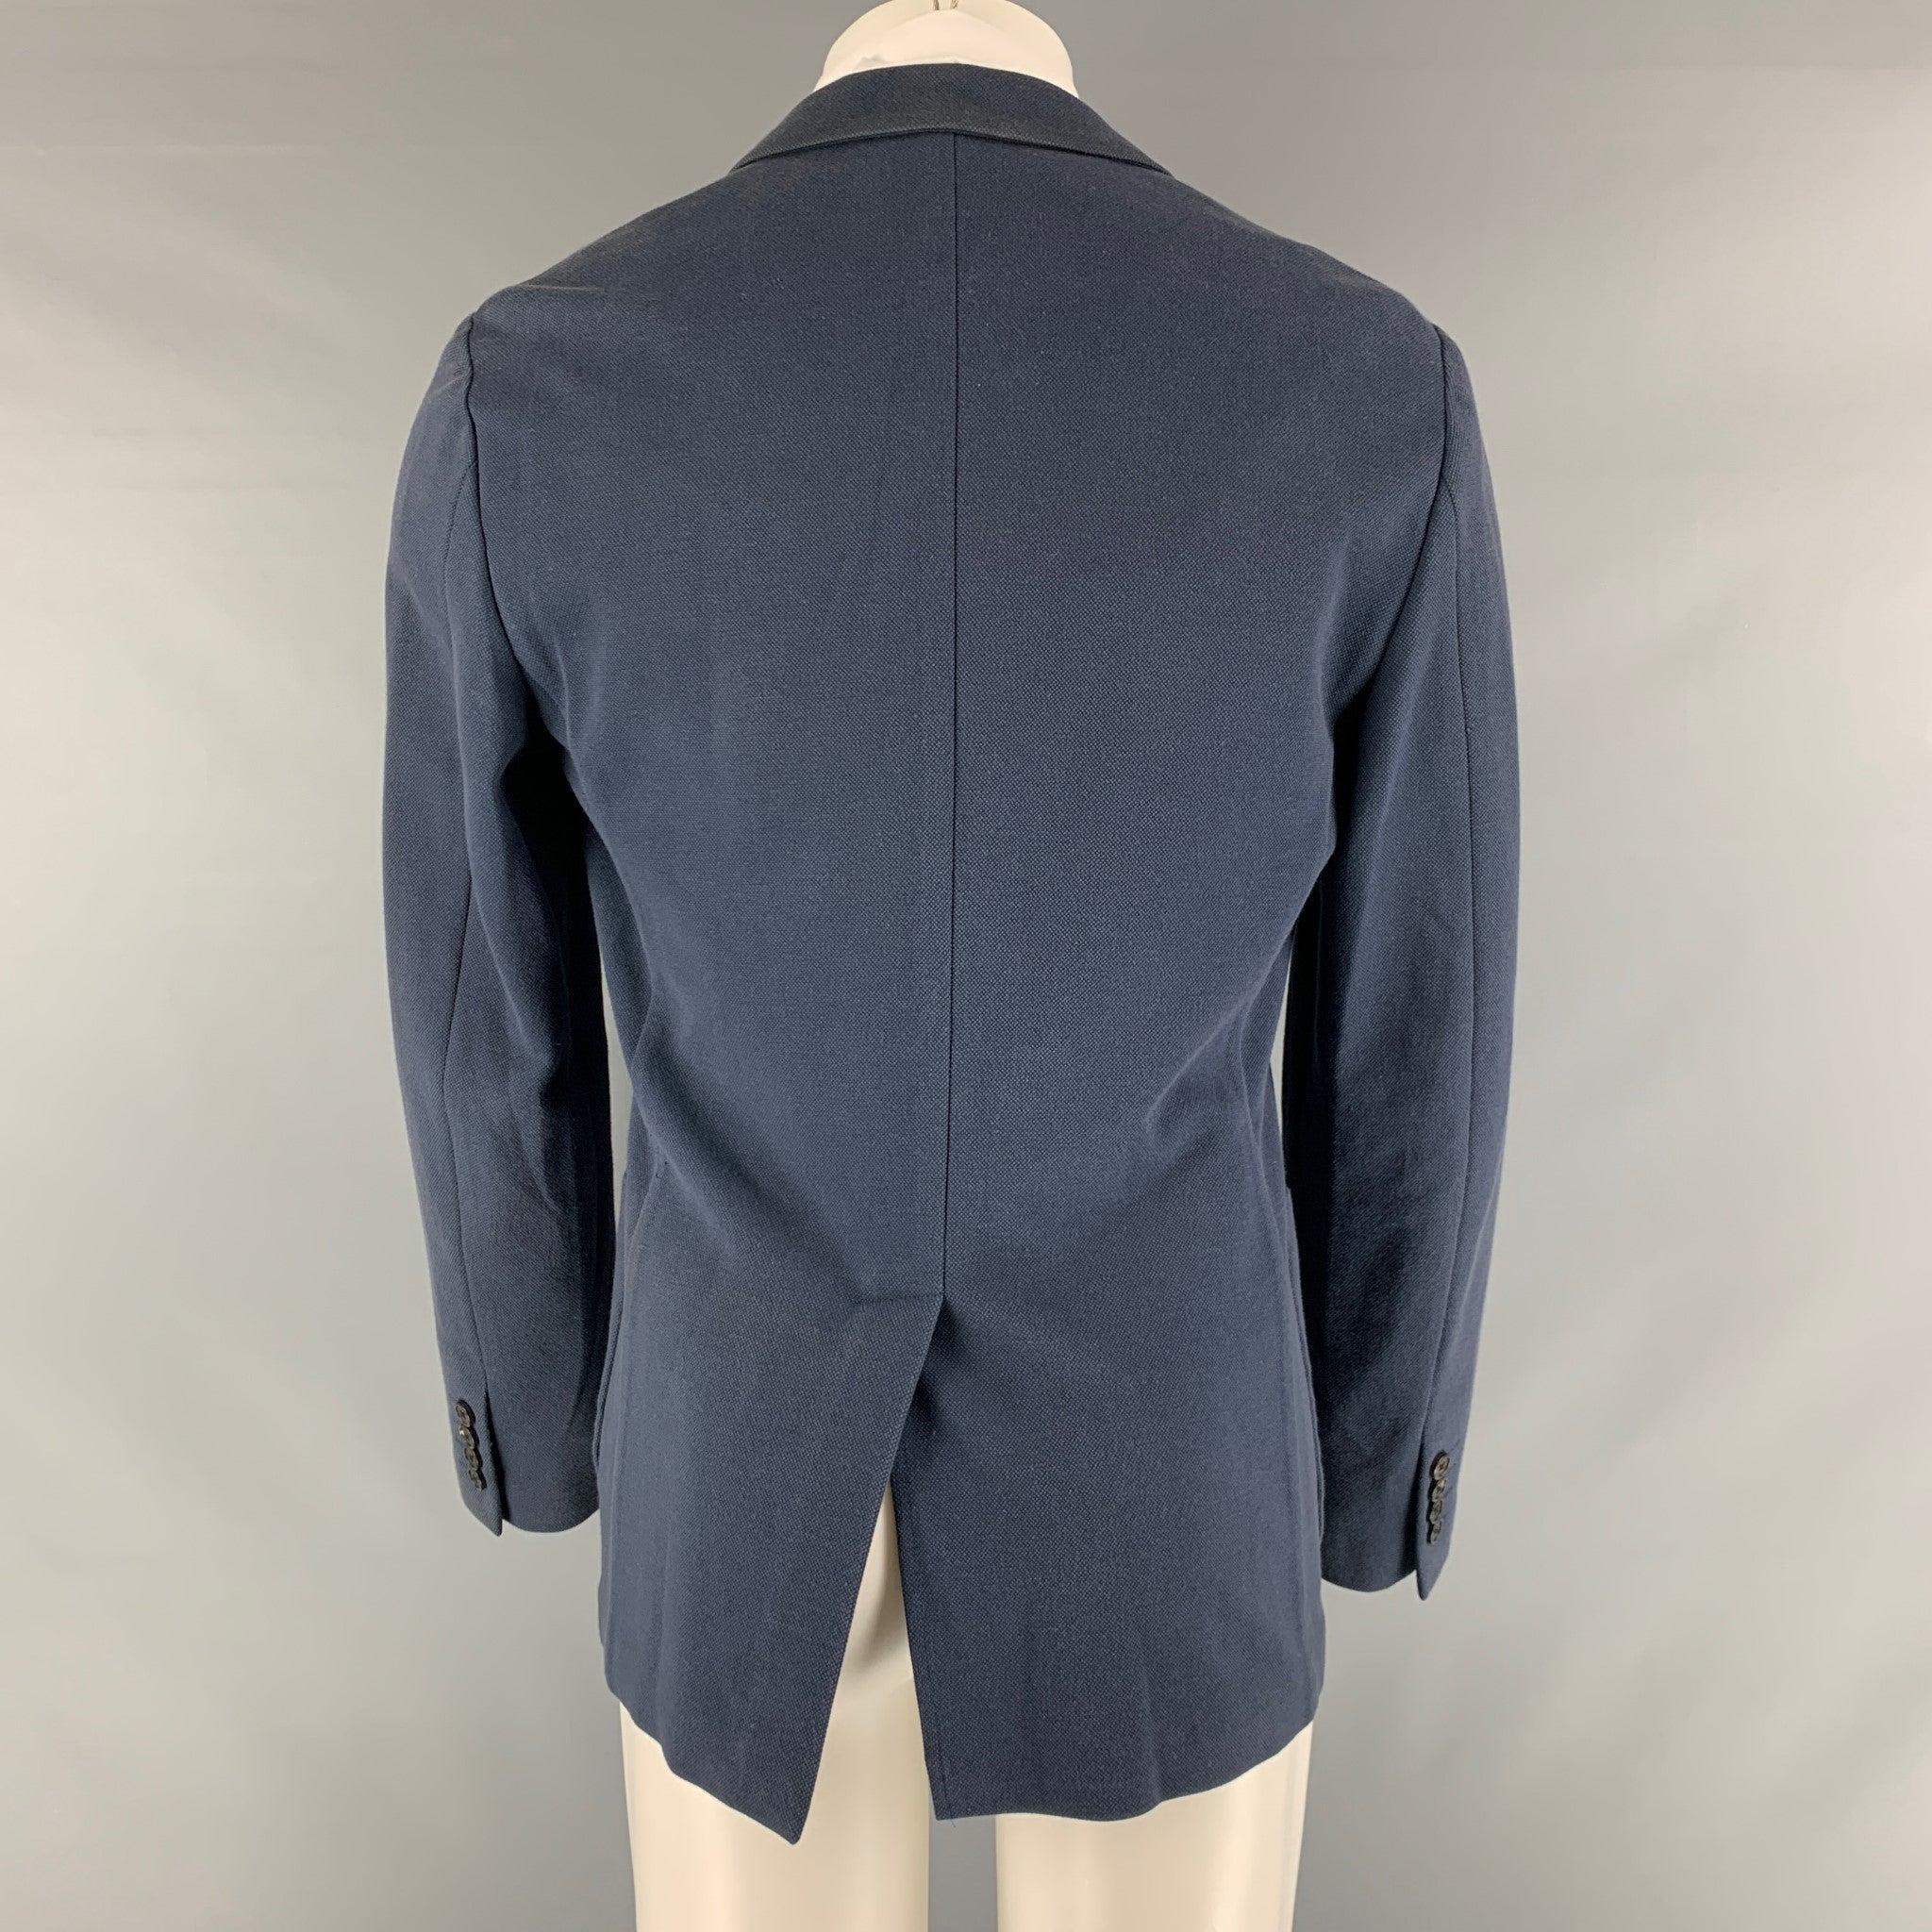 THEORY Size 40 Navy Solid Cotton Blend Notch Lapel Sport Coat In Good Condition For Sale In San Francisco, CA